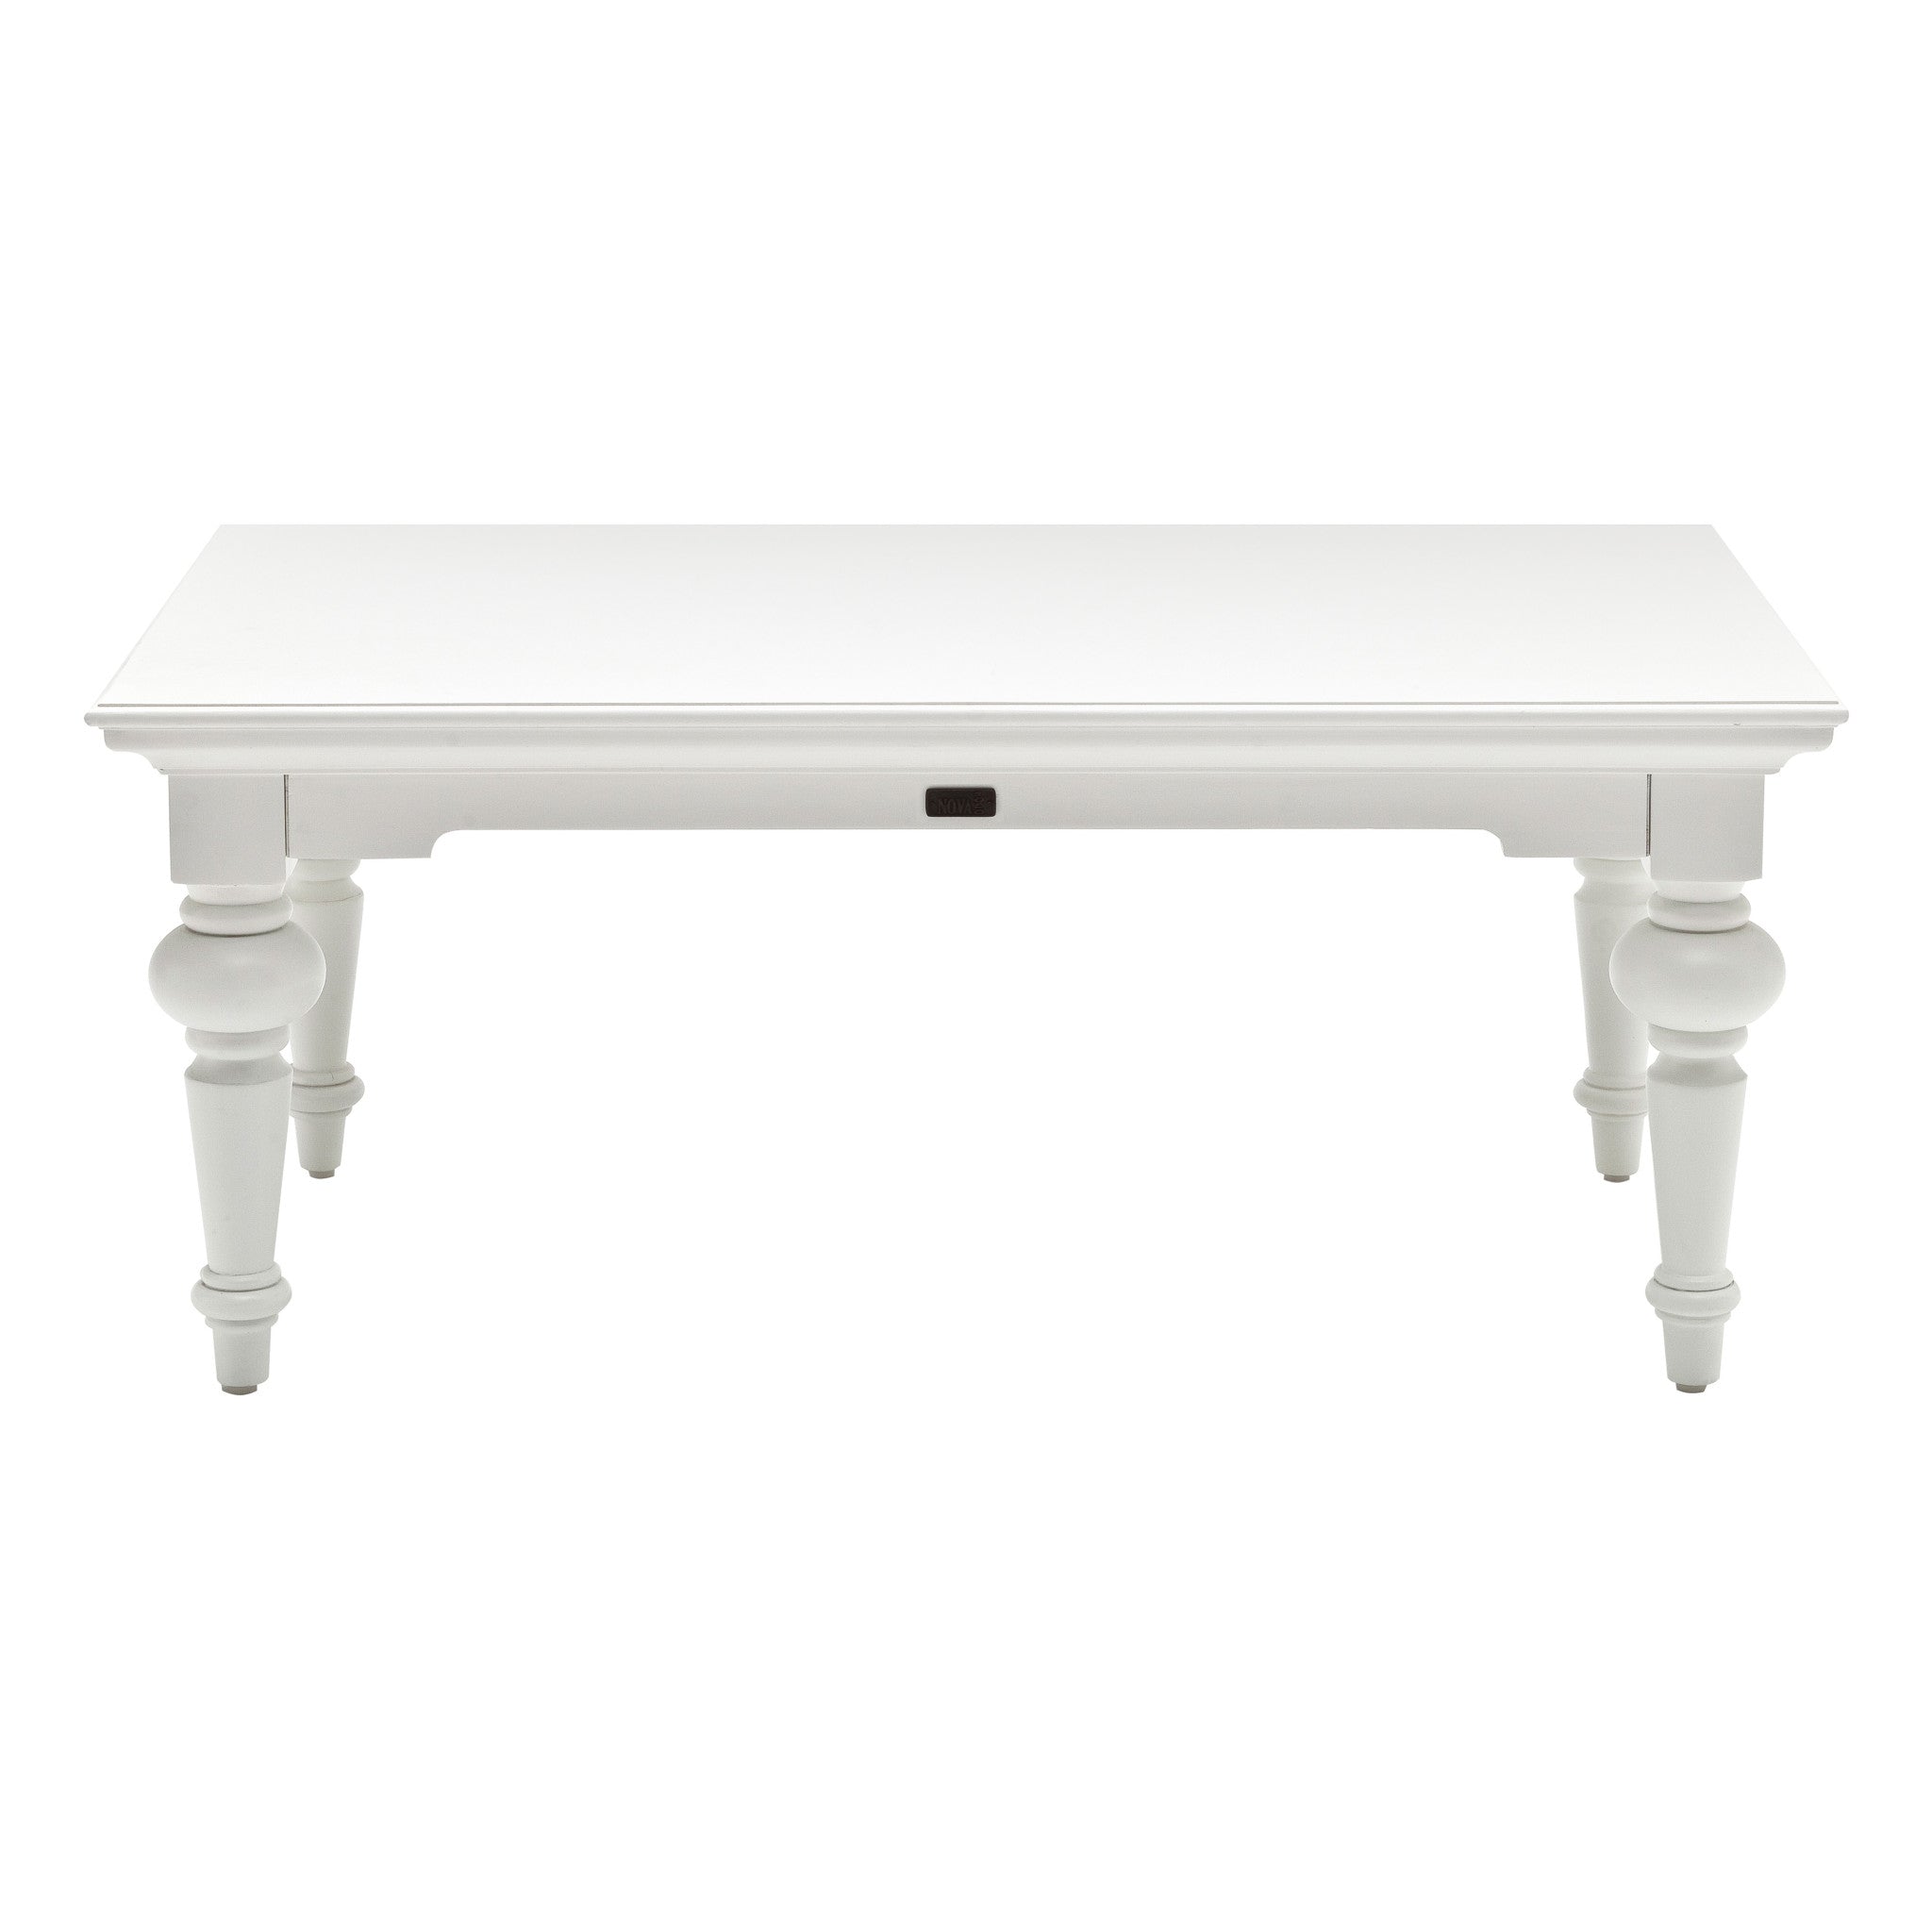 47" White Solid Wood Coffee Table